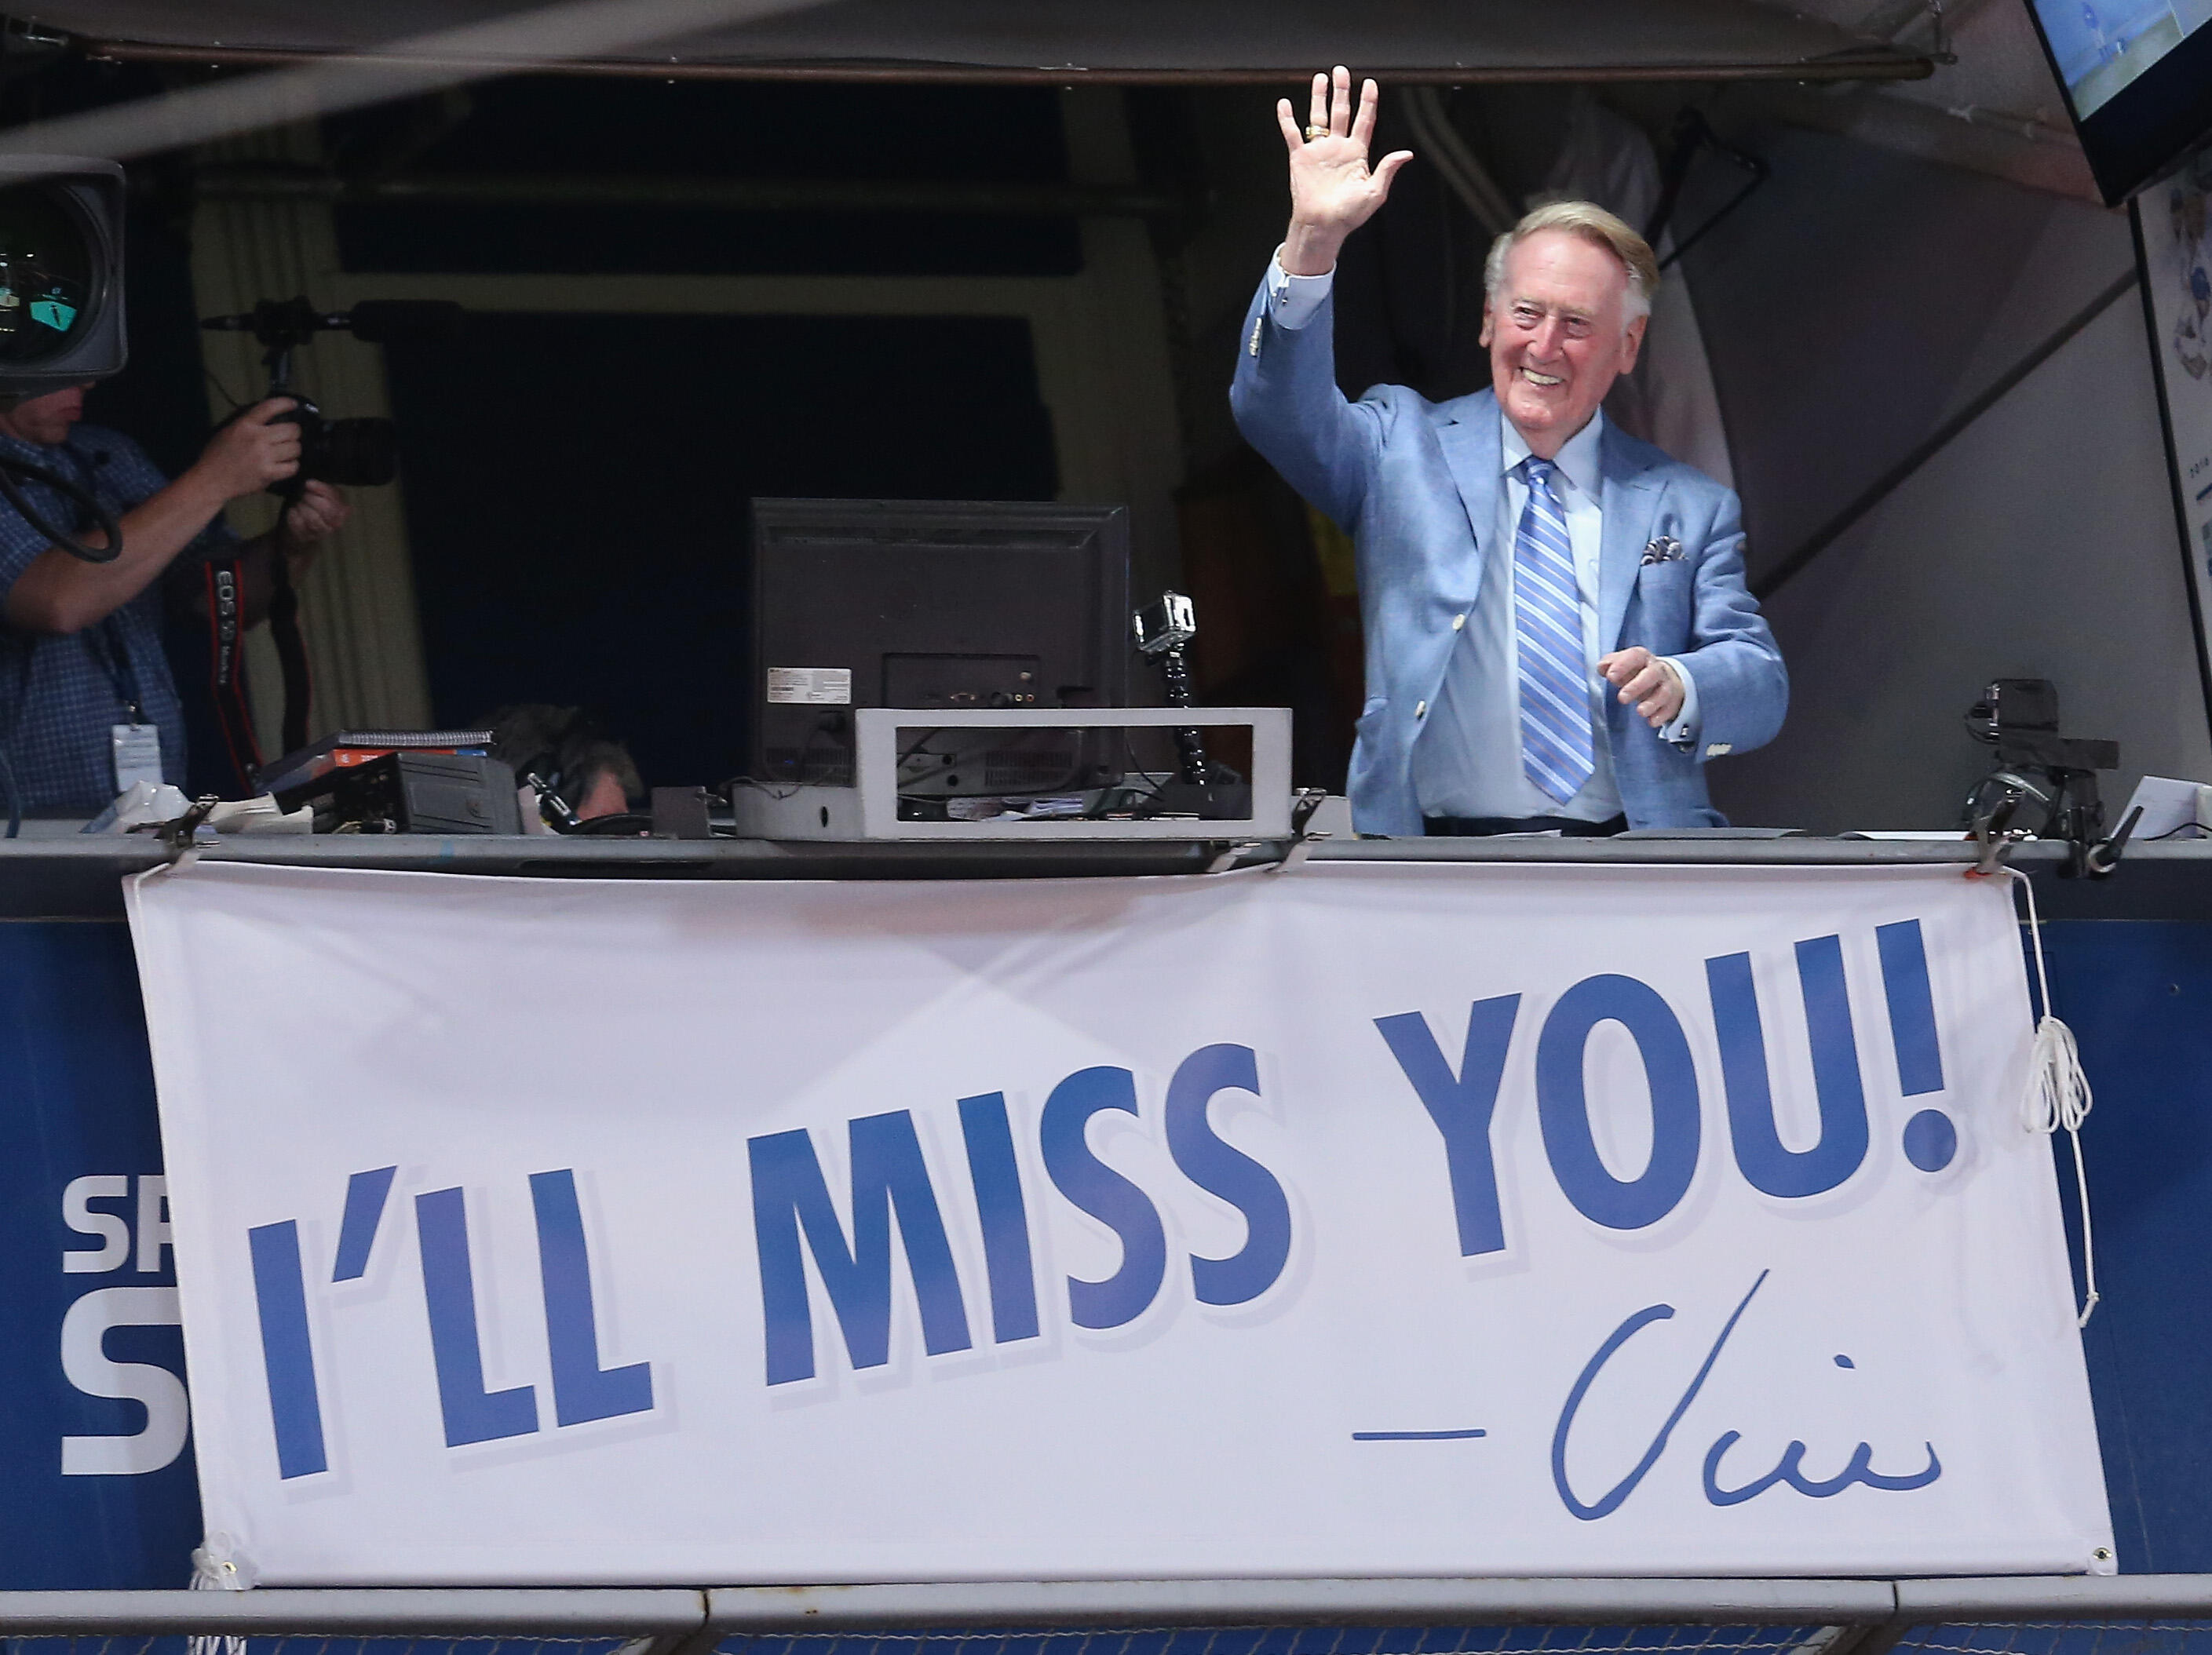 LOS ANGELES, CALIFORNIA - SEPTEMBER 24:  Los Angeles Dodgers broadcaster Vin Scully waves to the crowd after leading in the singing of Take Me Out to the Ball Game during the seventh inning stretch of the game with the Colorado Rockies at Dodger Stadium o